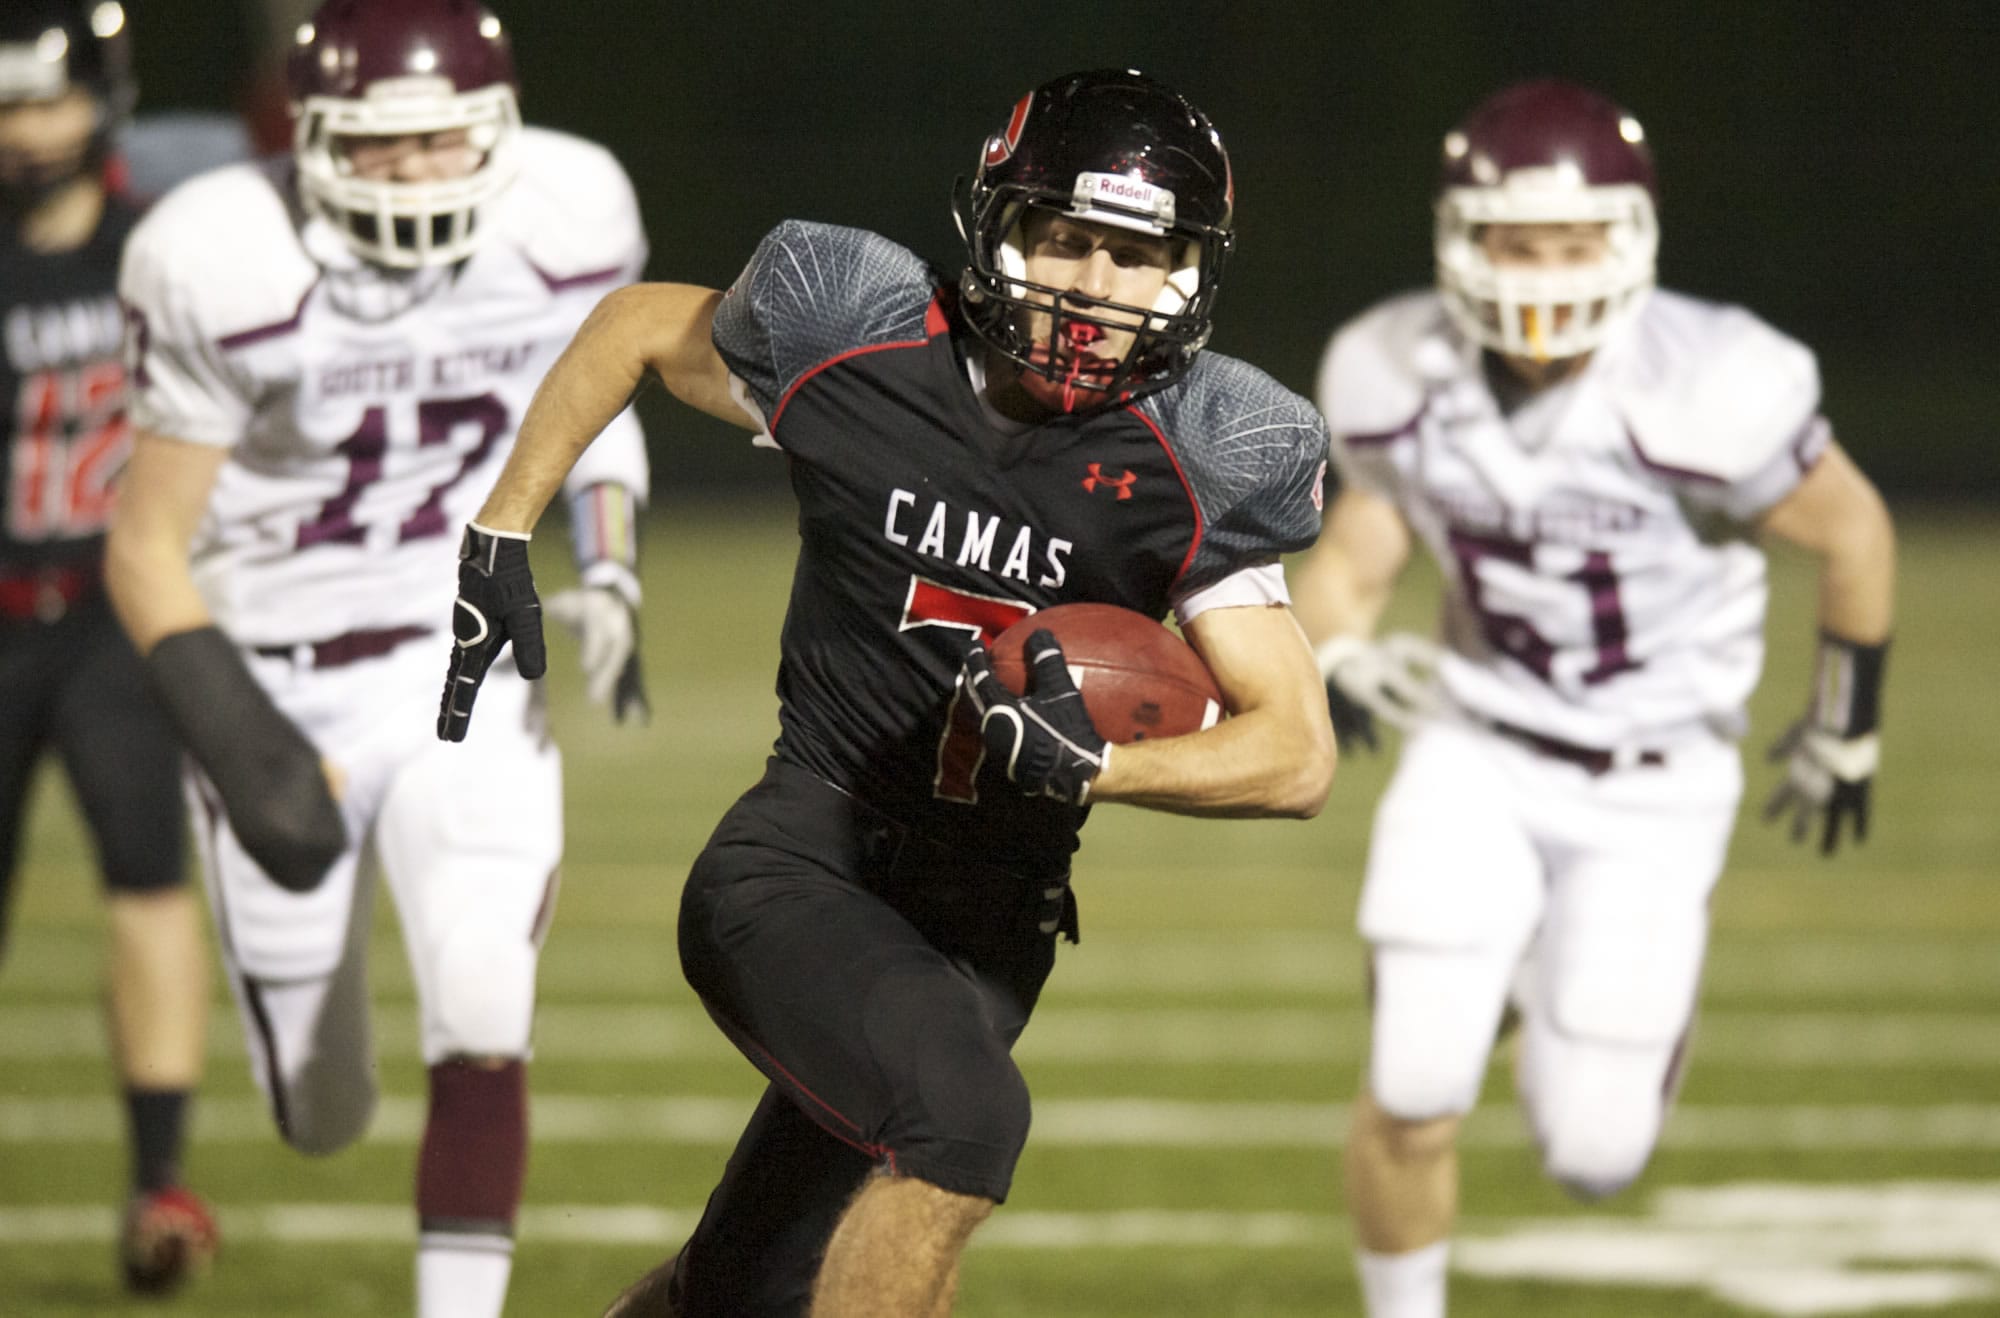 Camas' Nate Beasley runs the ball for a touchdown against South Kitsap on Friday.